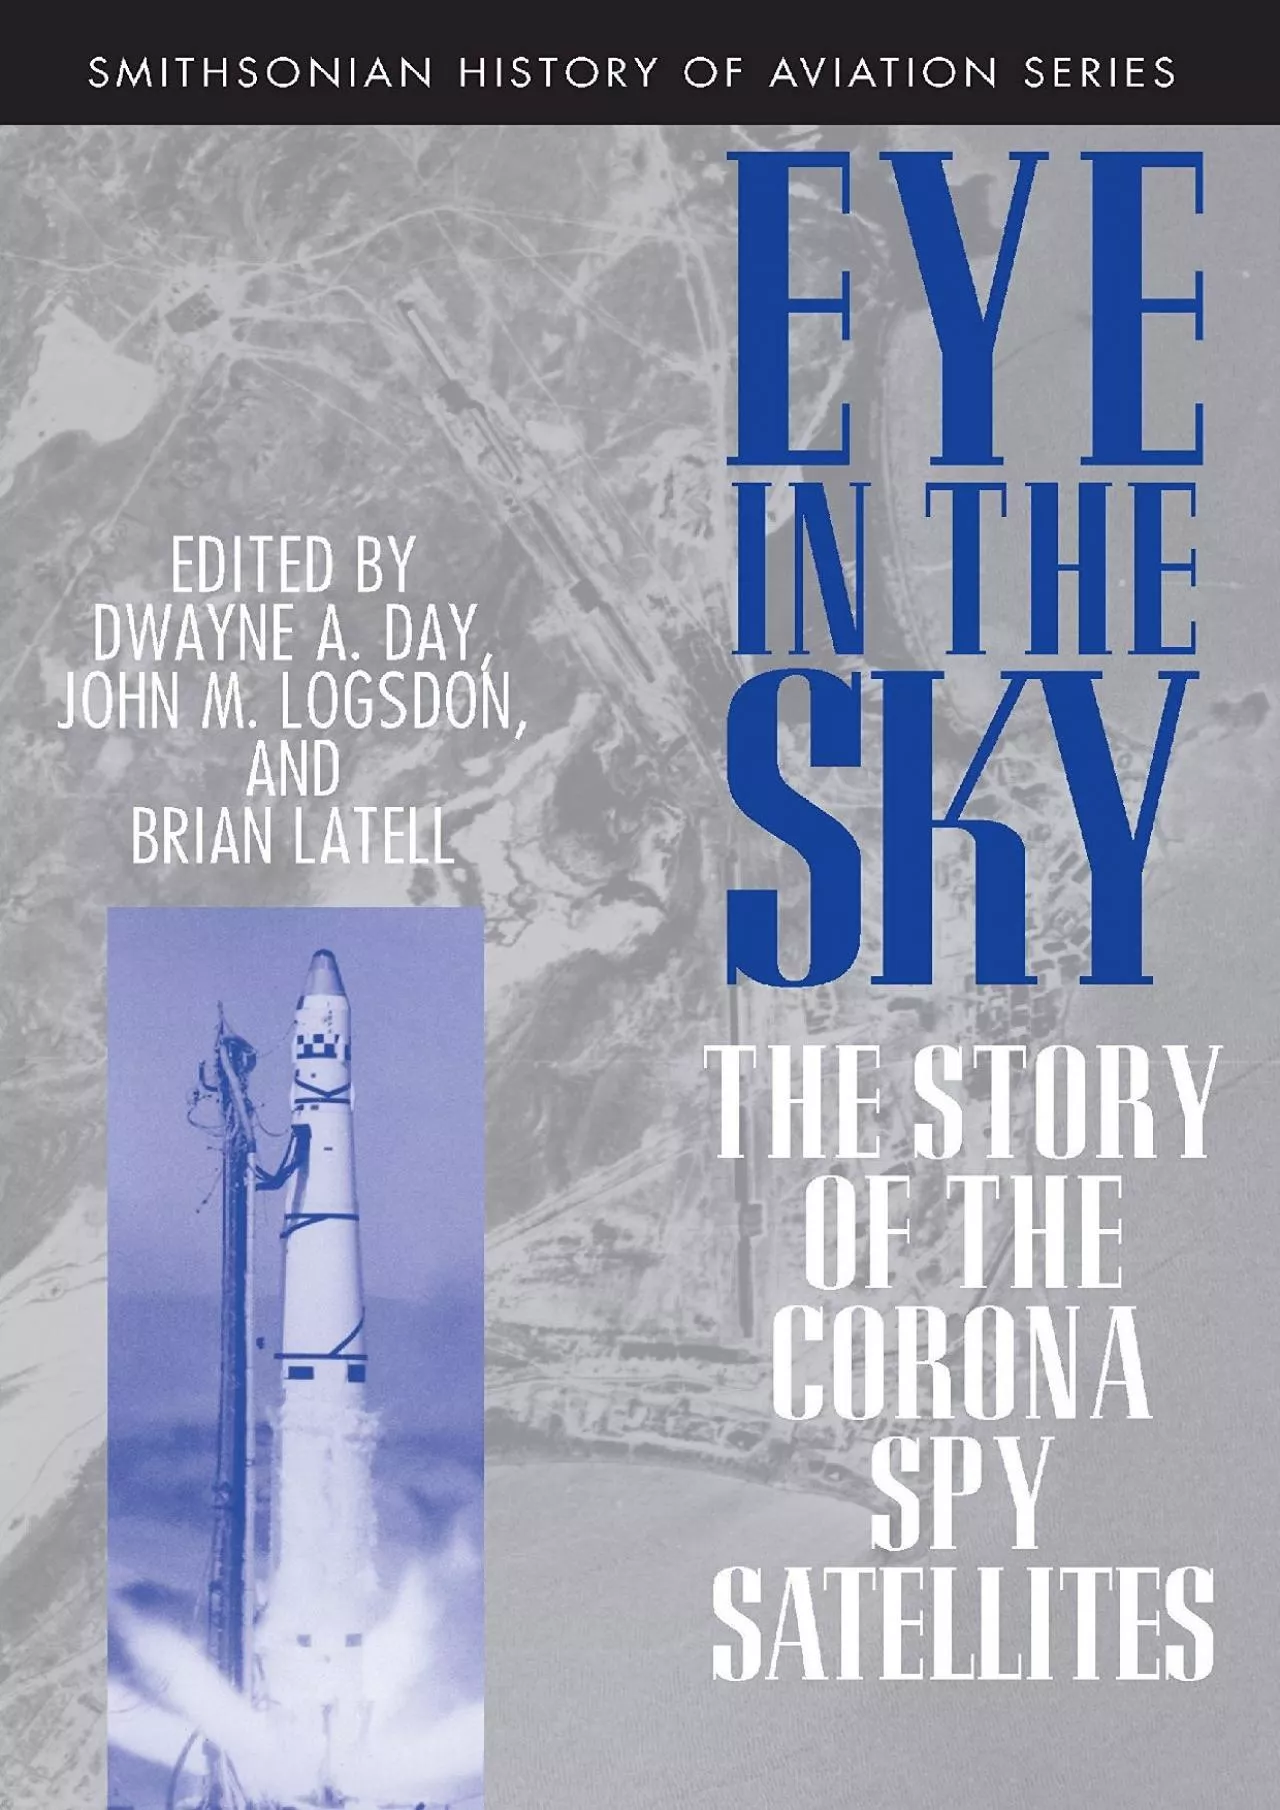 (BOOK)-Eye in the Sky: The Story of the Corona Spy Satellites (Smithsonian History of